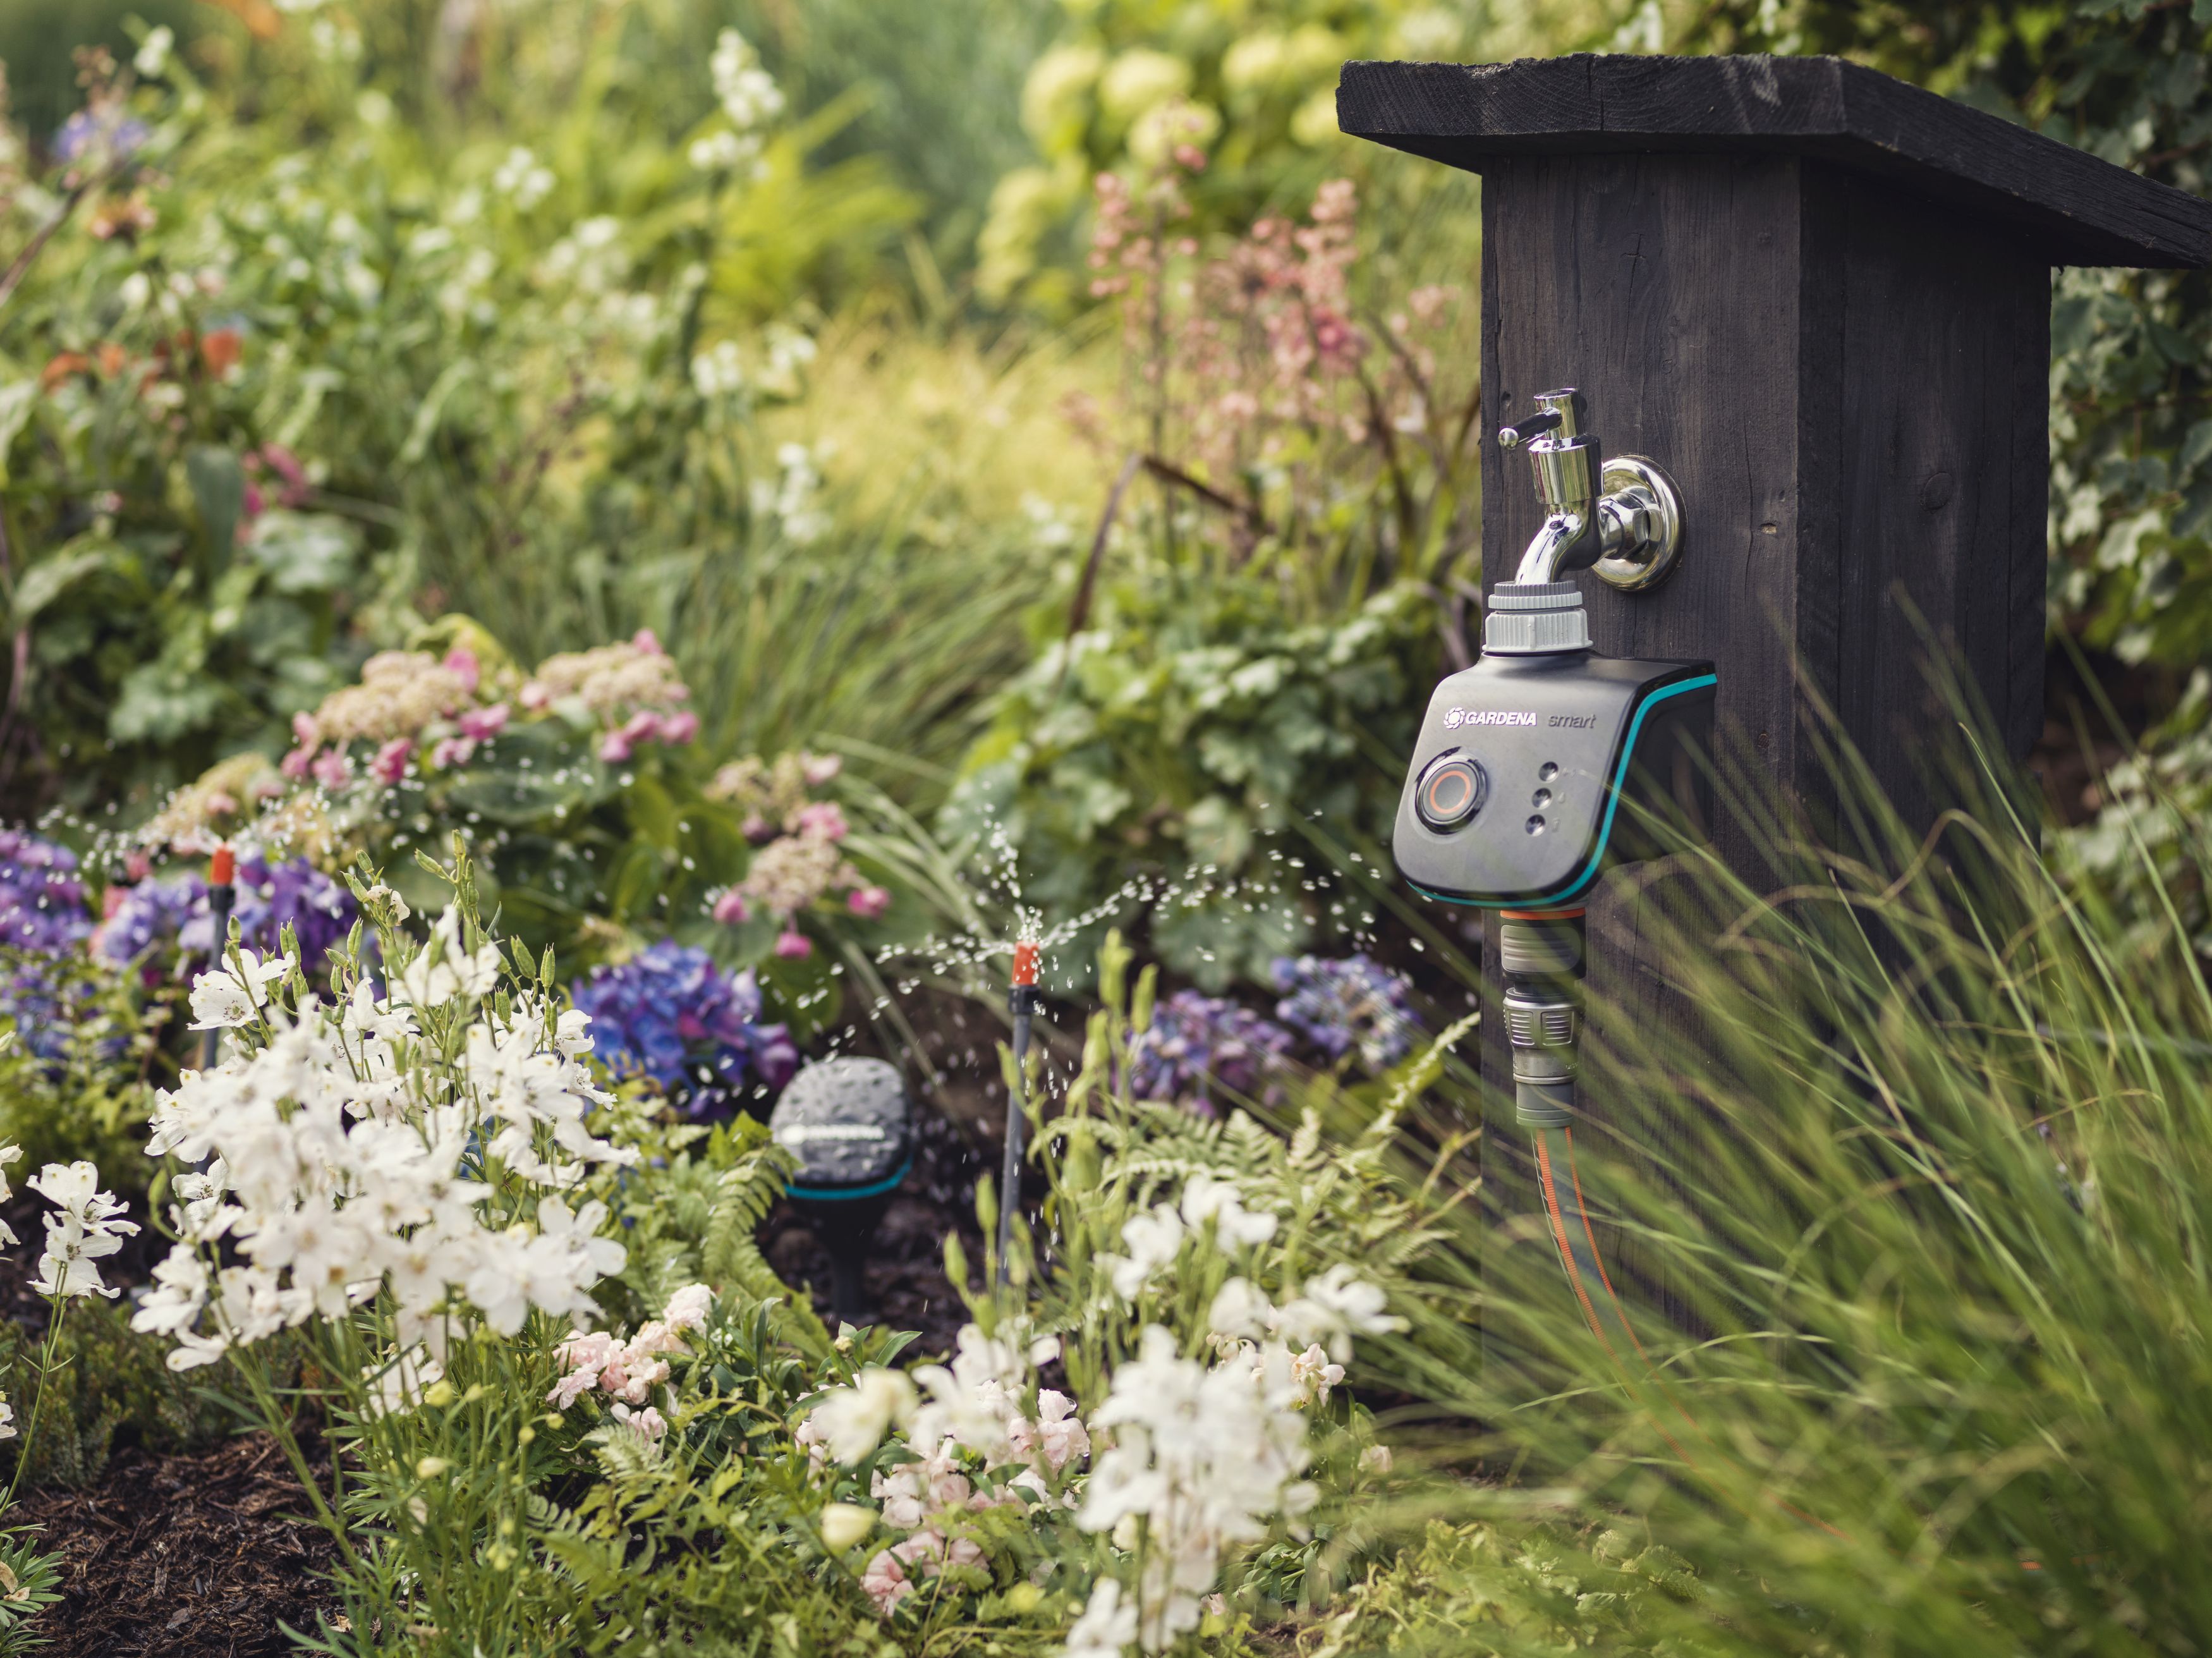 Watering your garden is now even smarter with weather data